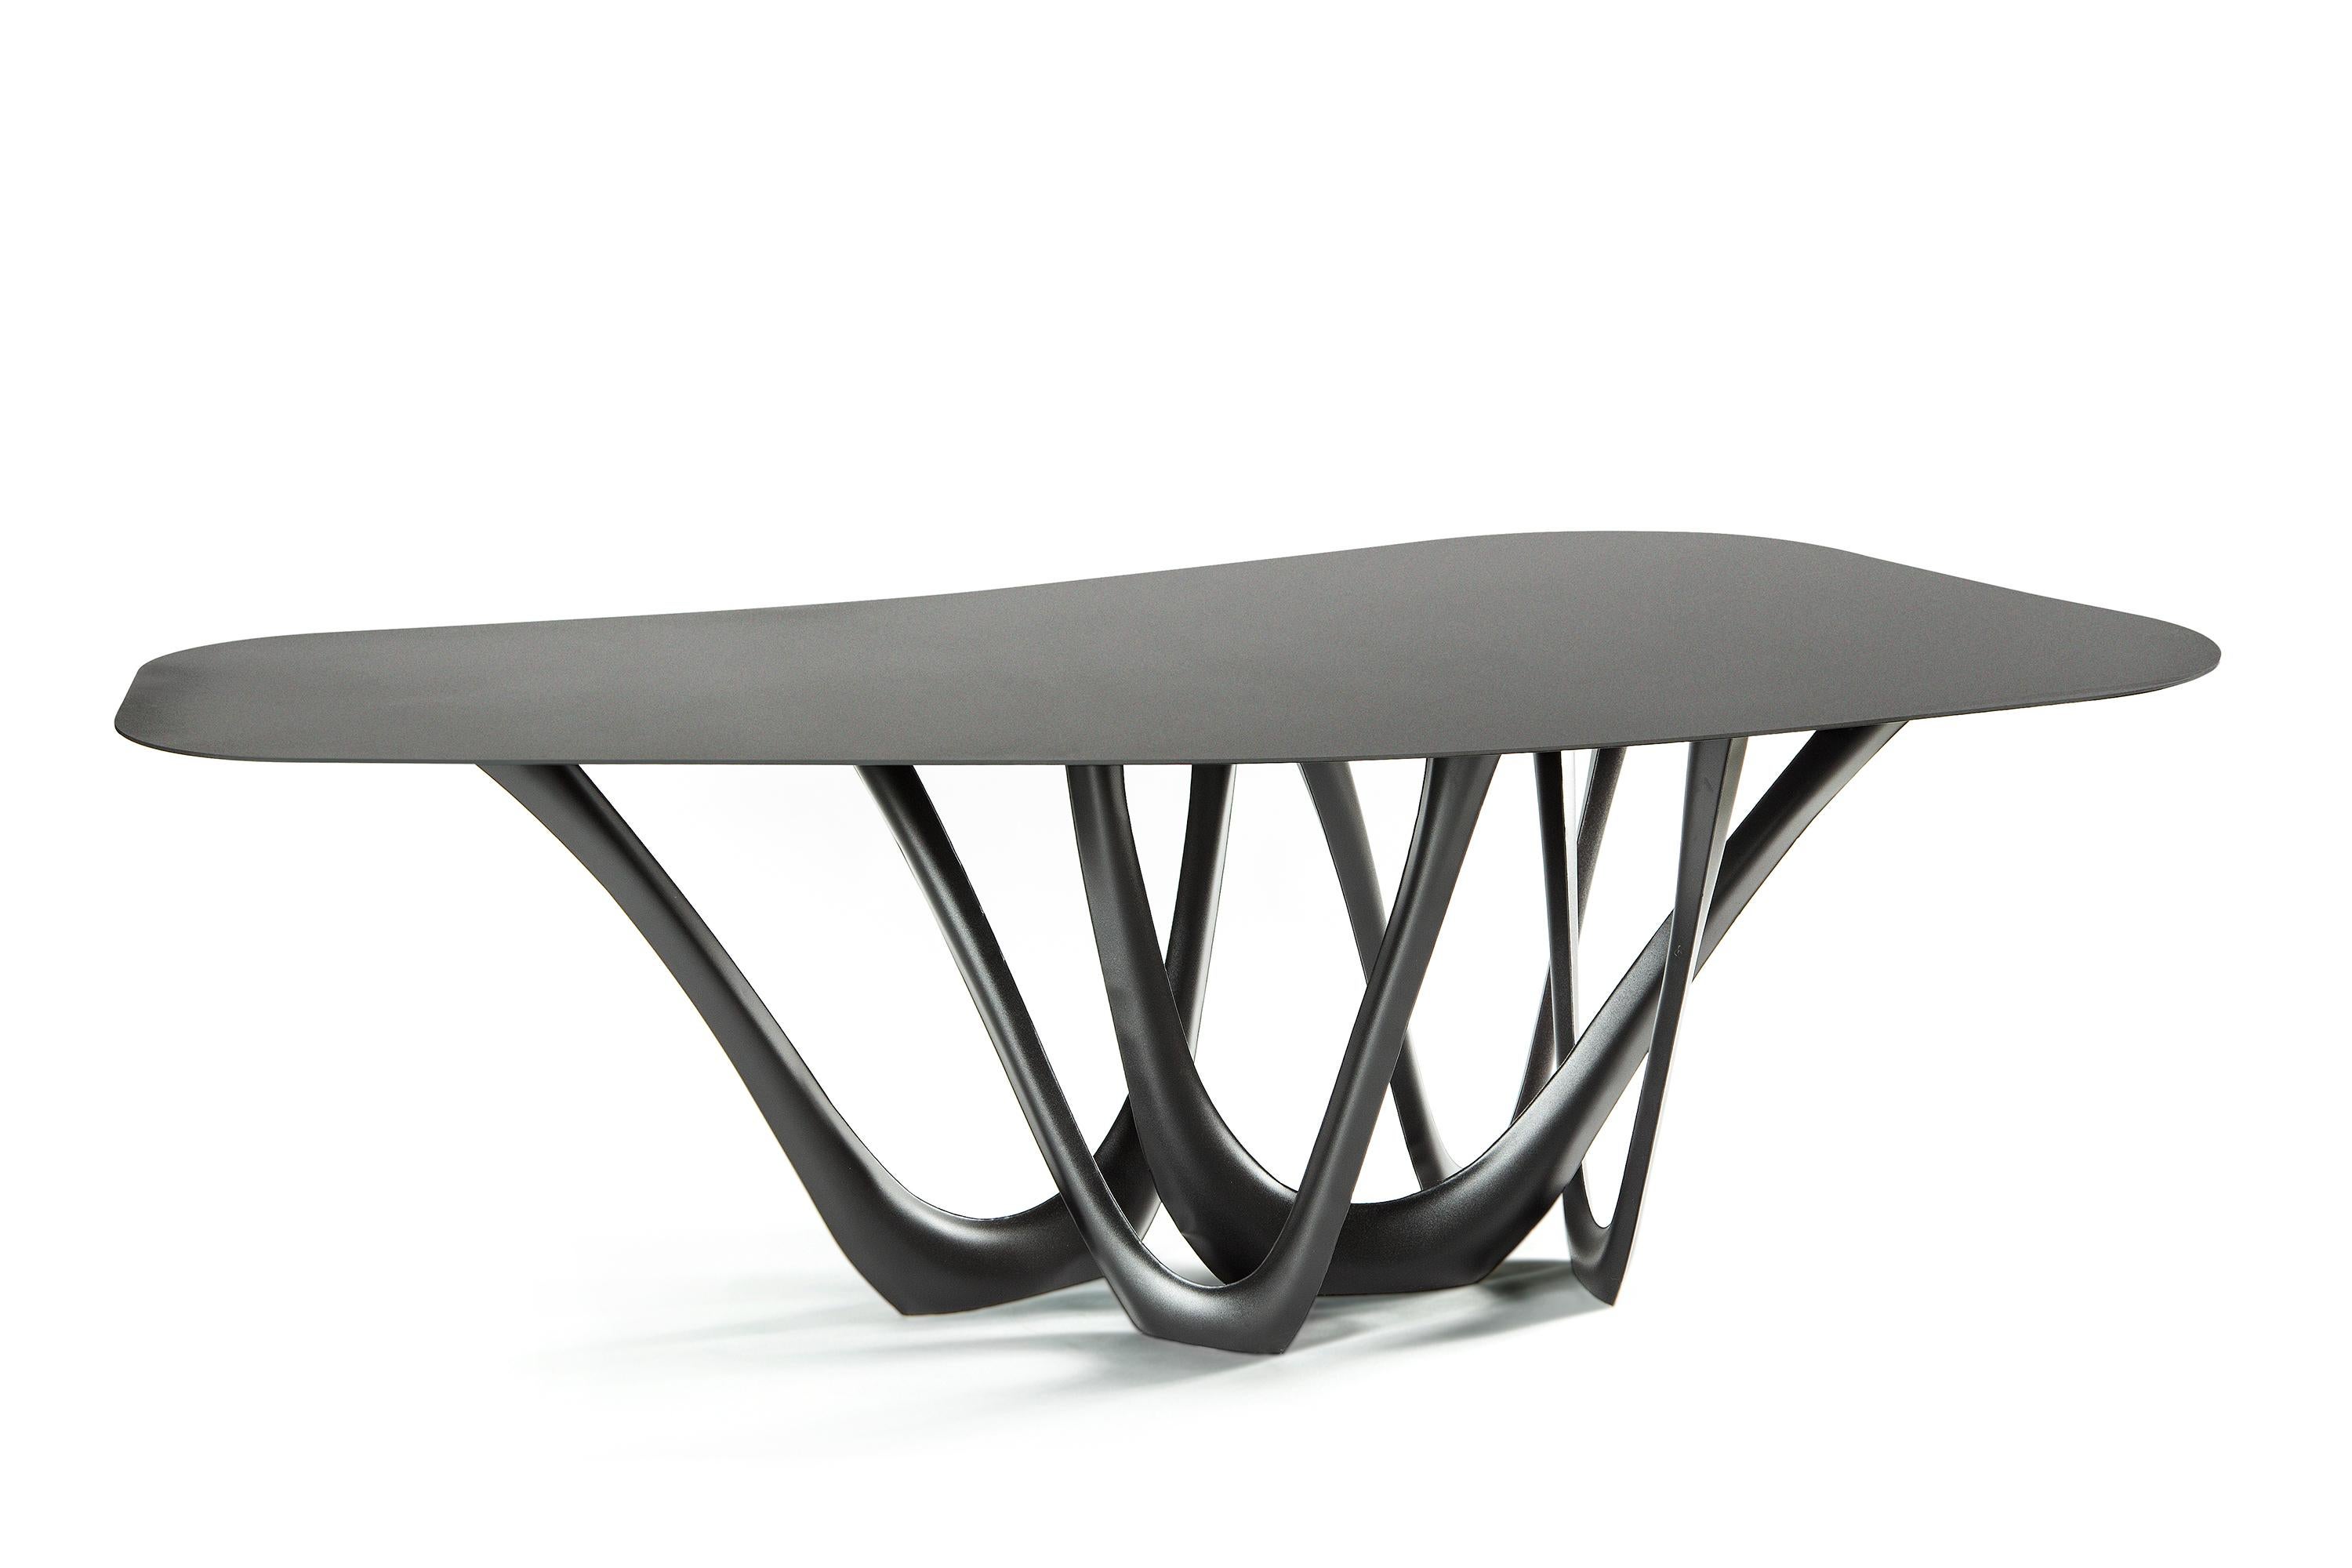 Powder-Coated Blue Grey Steel Sculptural G-Table by Zieta For Sale